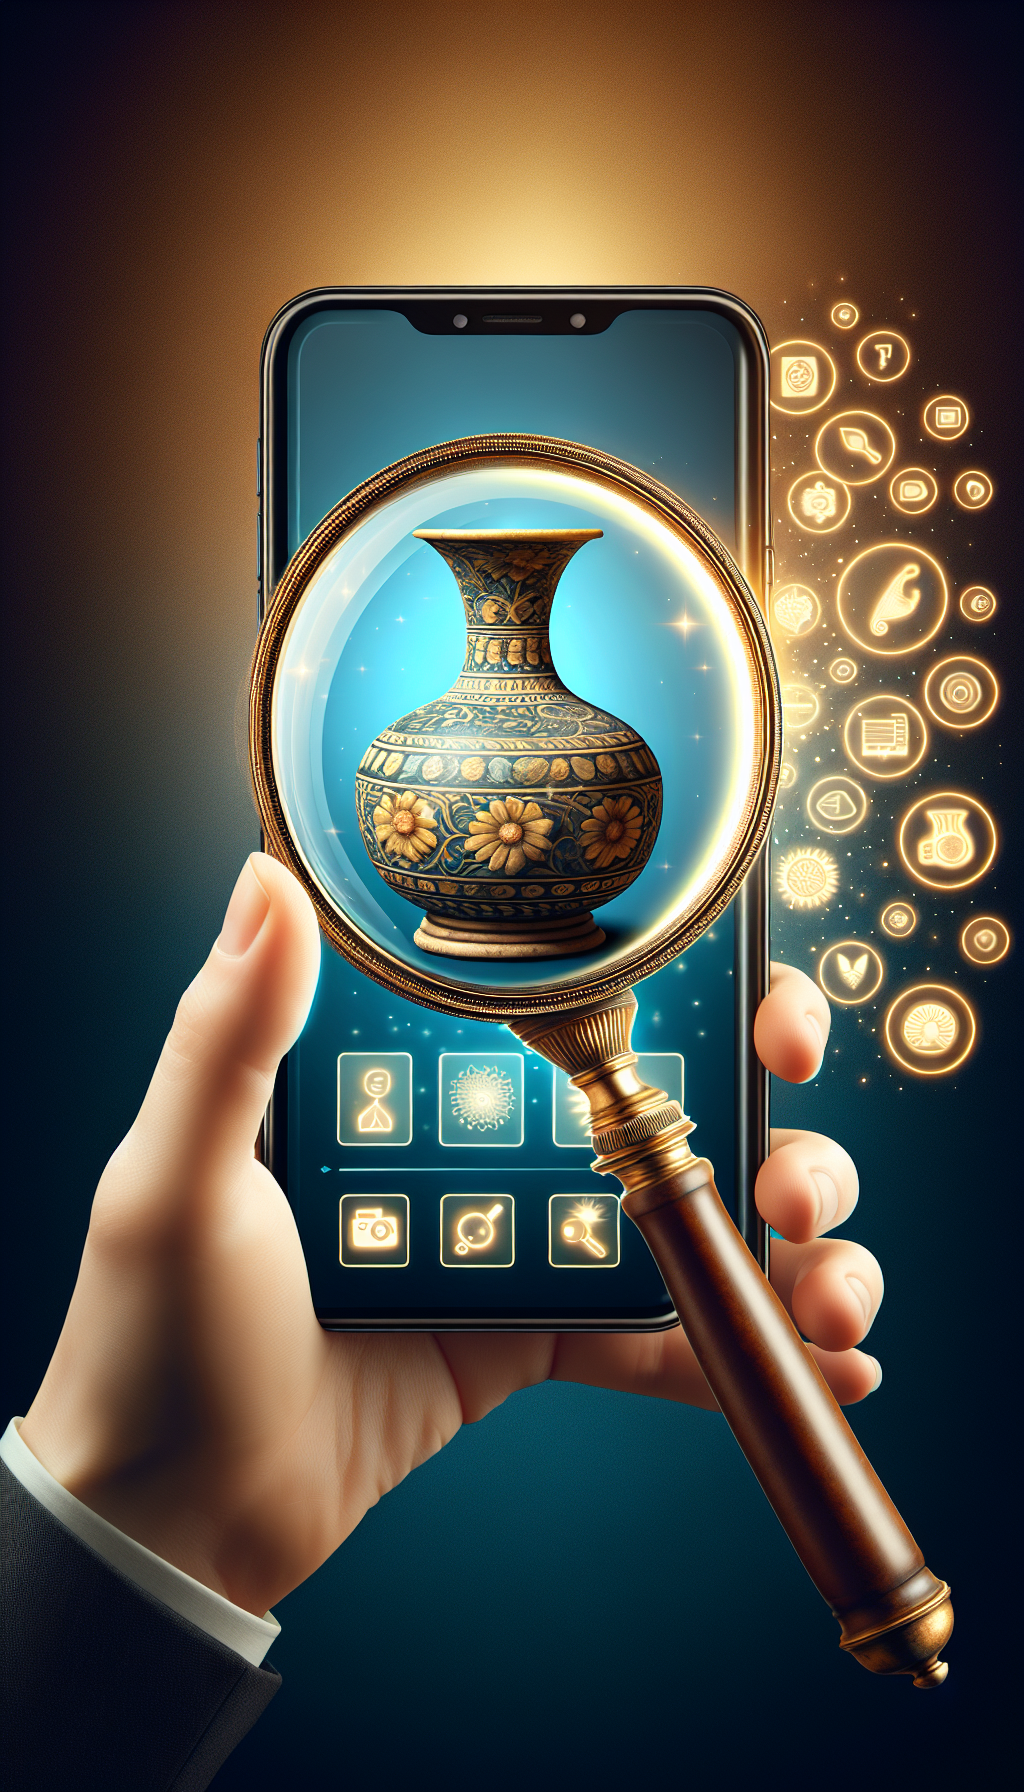 A whimsical drawing showcases an antique magnifying glass that doubles as a smartphone. Its screen displays a classic vase being scanned, with an overlay of floating app icons featuring various historical periods. The magnifying glass reveals intricate patterns on the vase unseen to the naked eye, symbolizing the app's power to delve into the past.